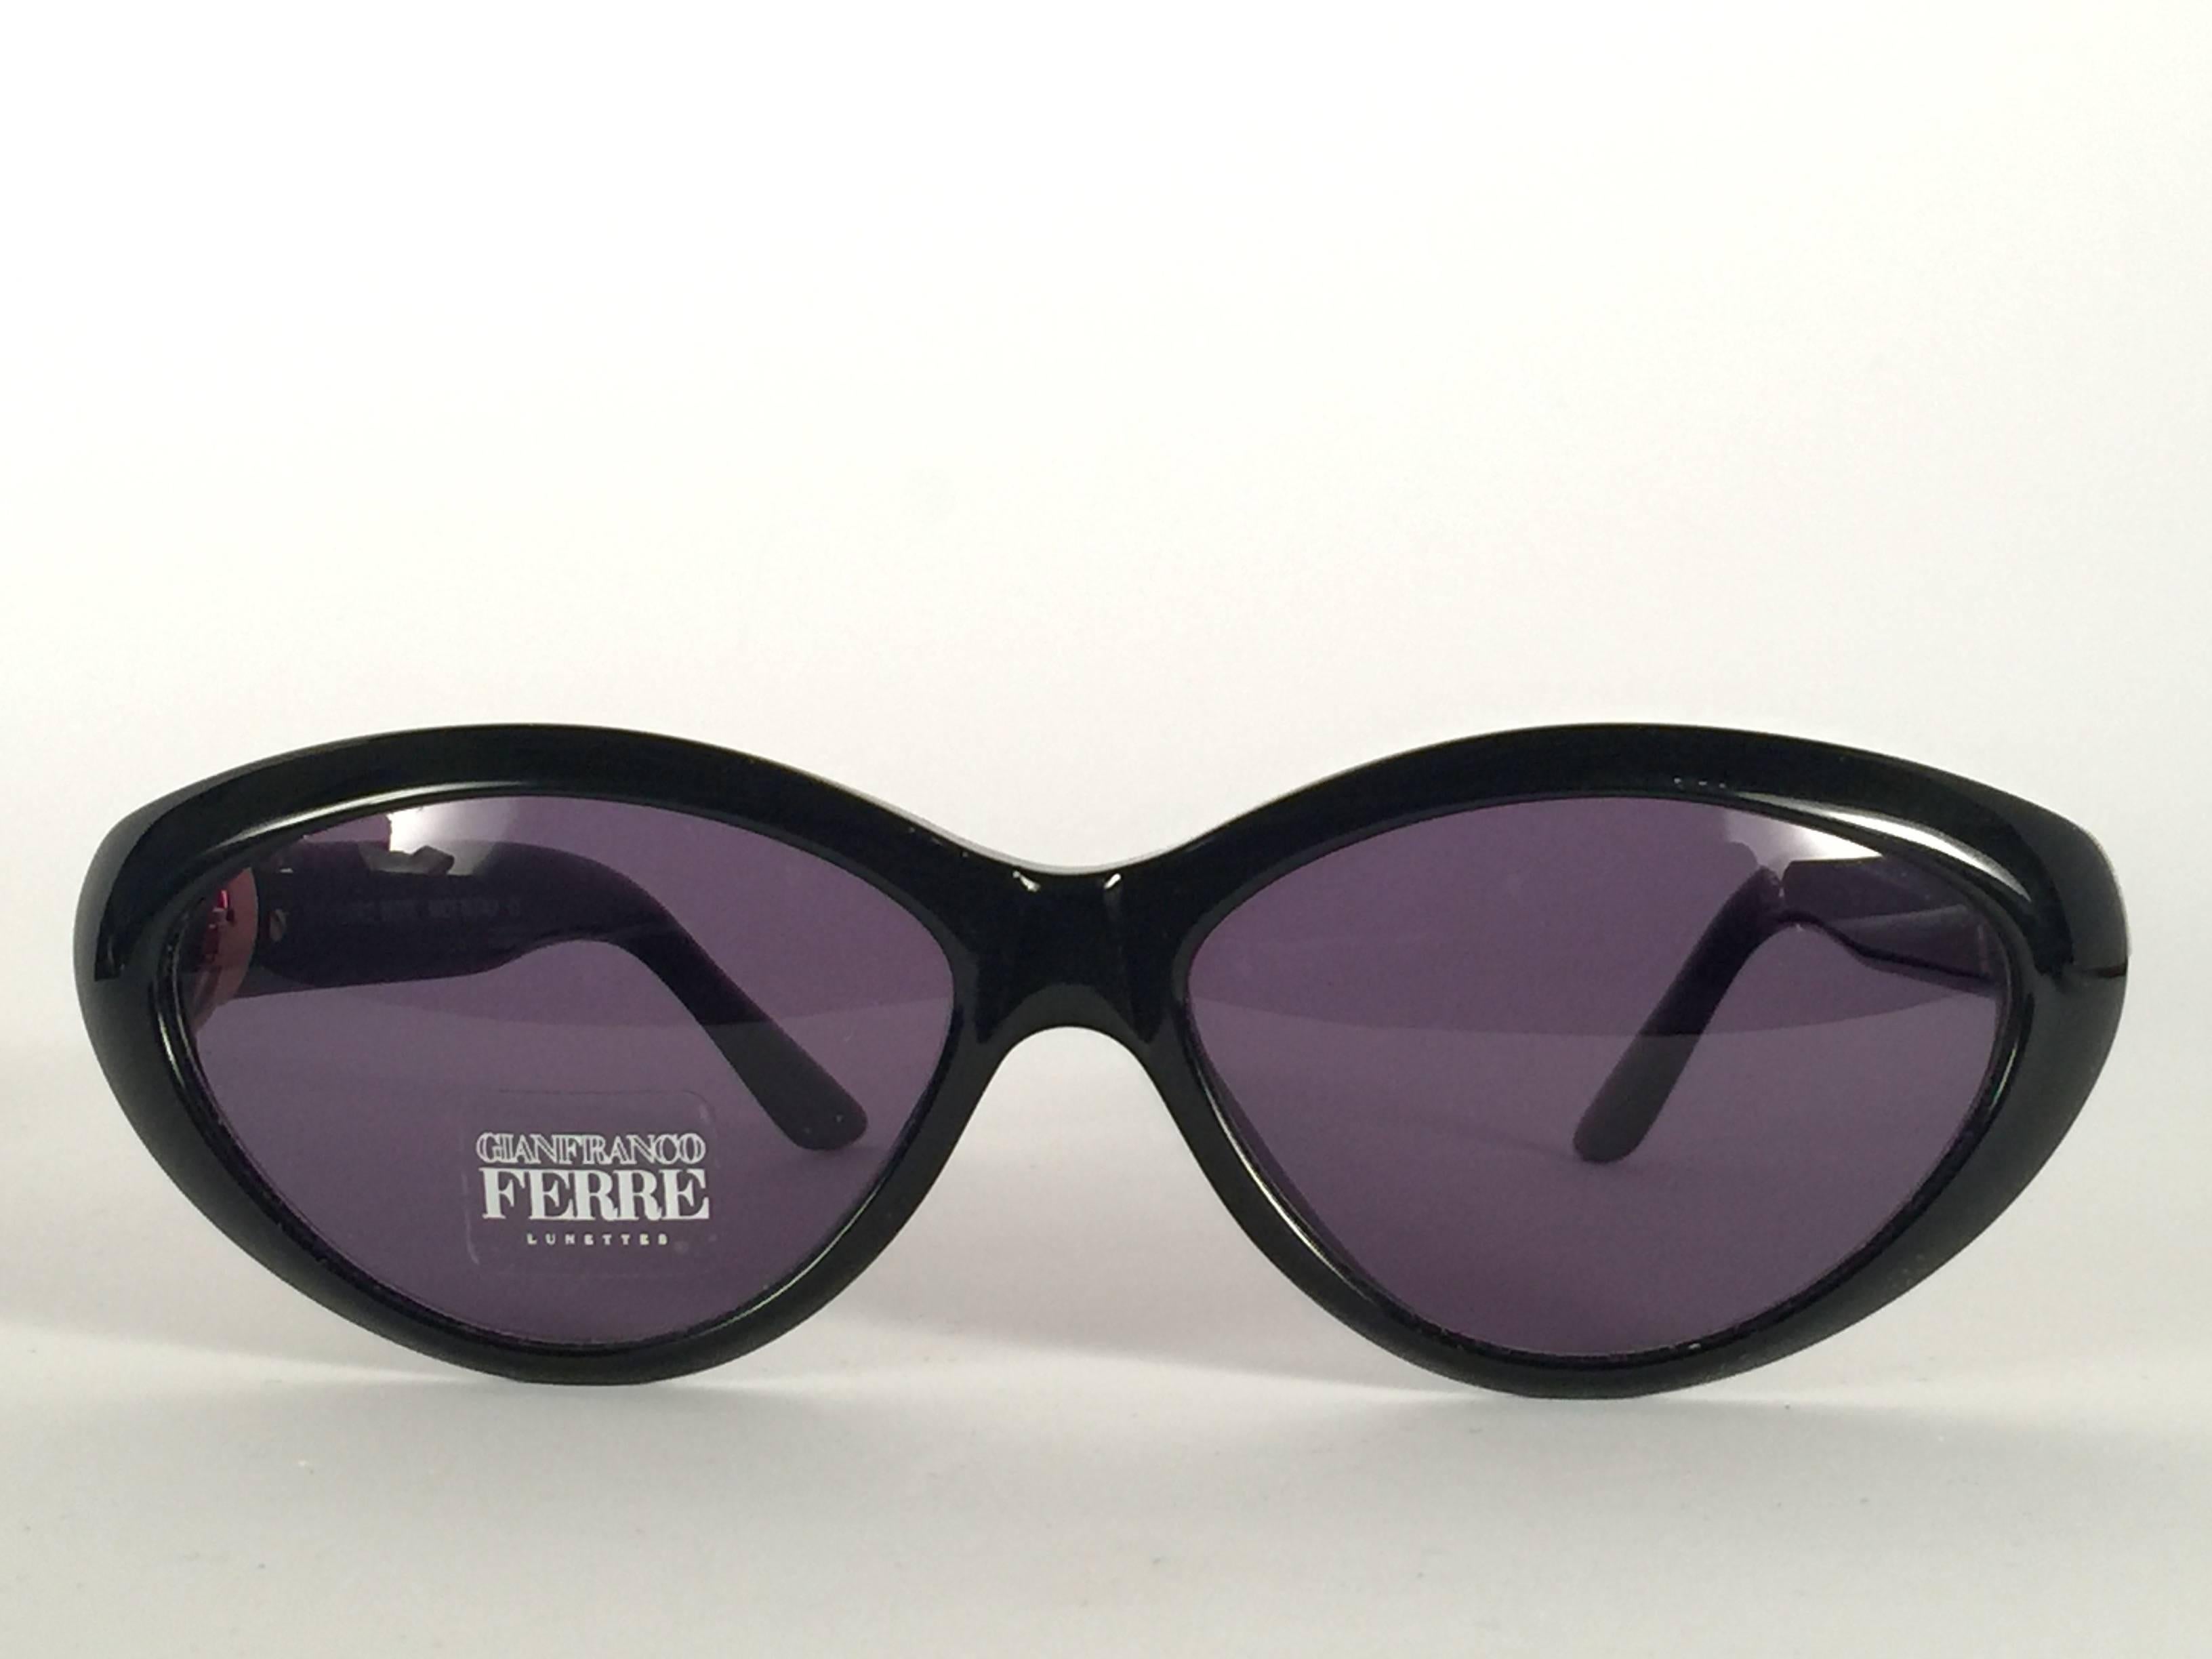 New Vintage Gianfranco Ferré Black & Rhinestones 1990's Made in Italy Sunglasses For Sale 4